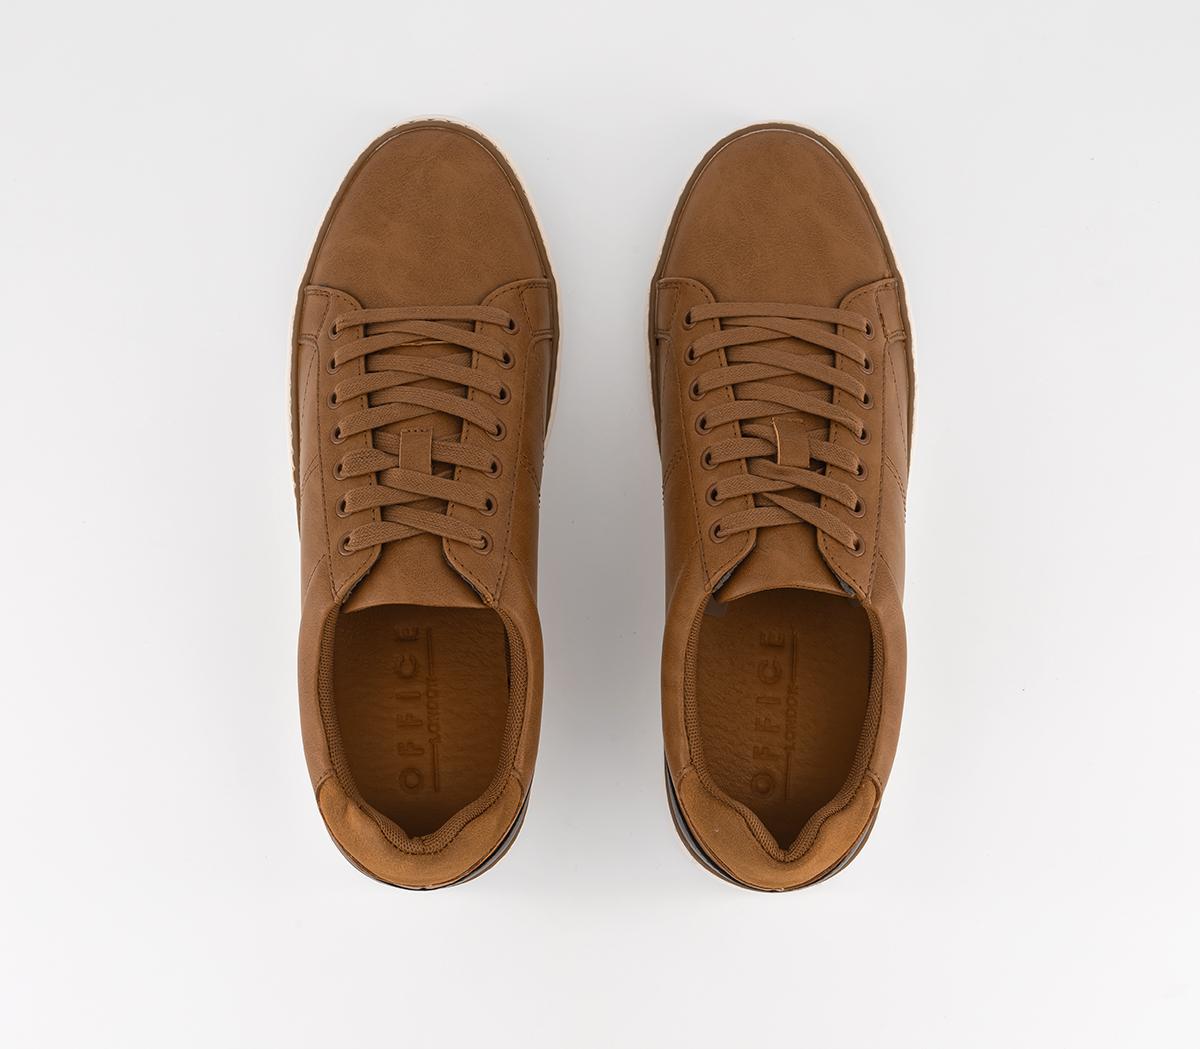 OFFICE Catania 7 Eye Trainers Tan - Men's Casual Shoes